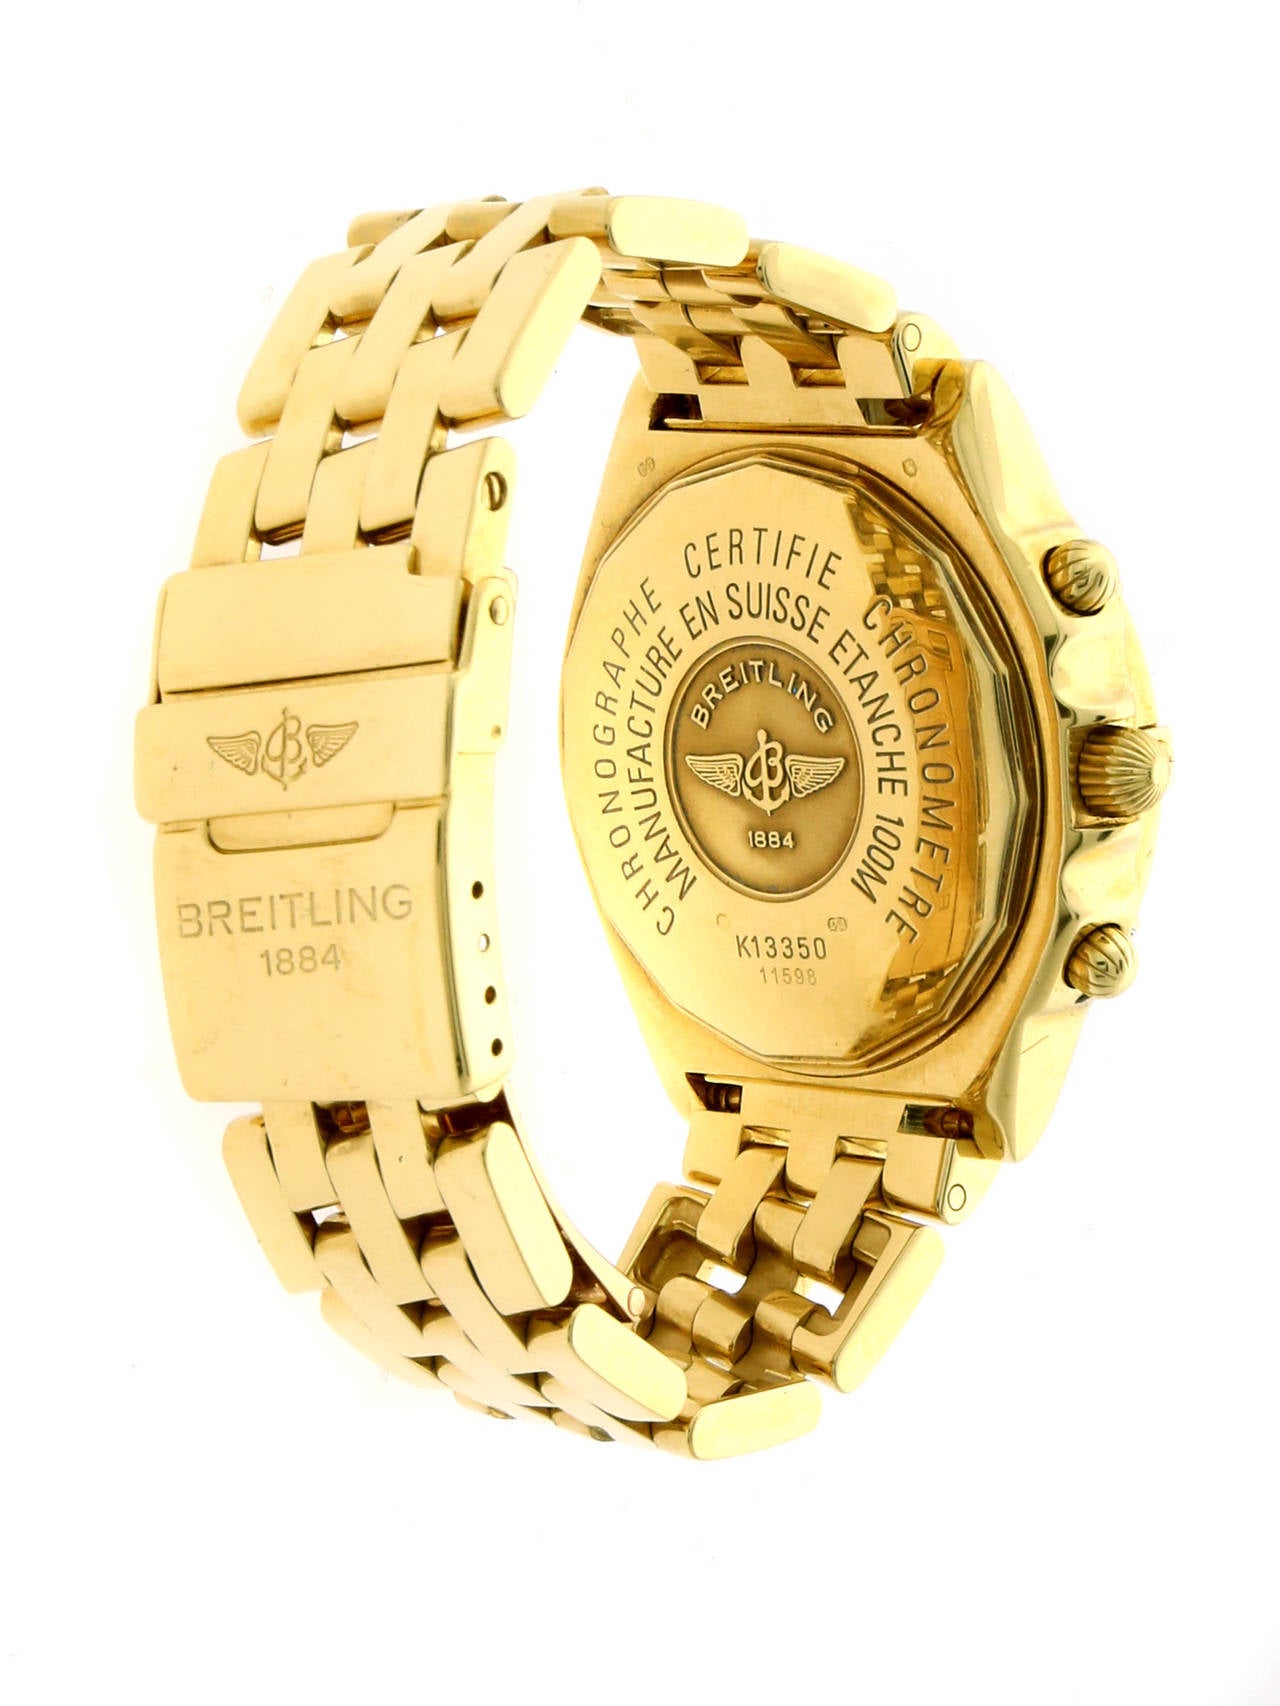 A bold authentic Breitling Chronomat watch in 18k yellow gold.

Case Size: 40mm 

Inventory ID: 0000312